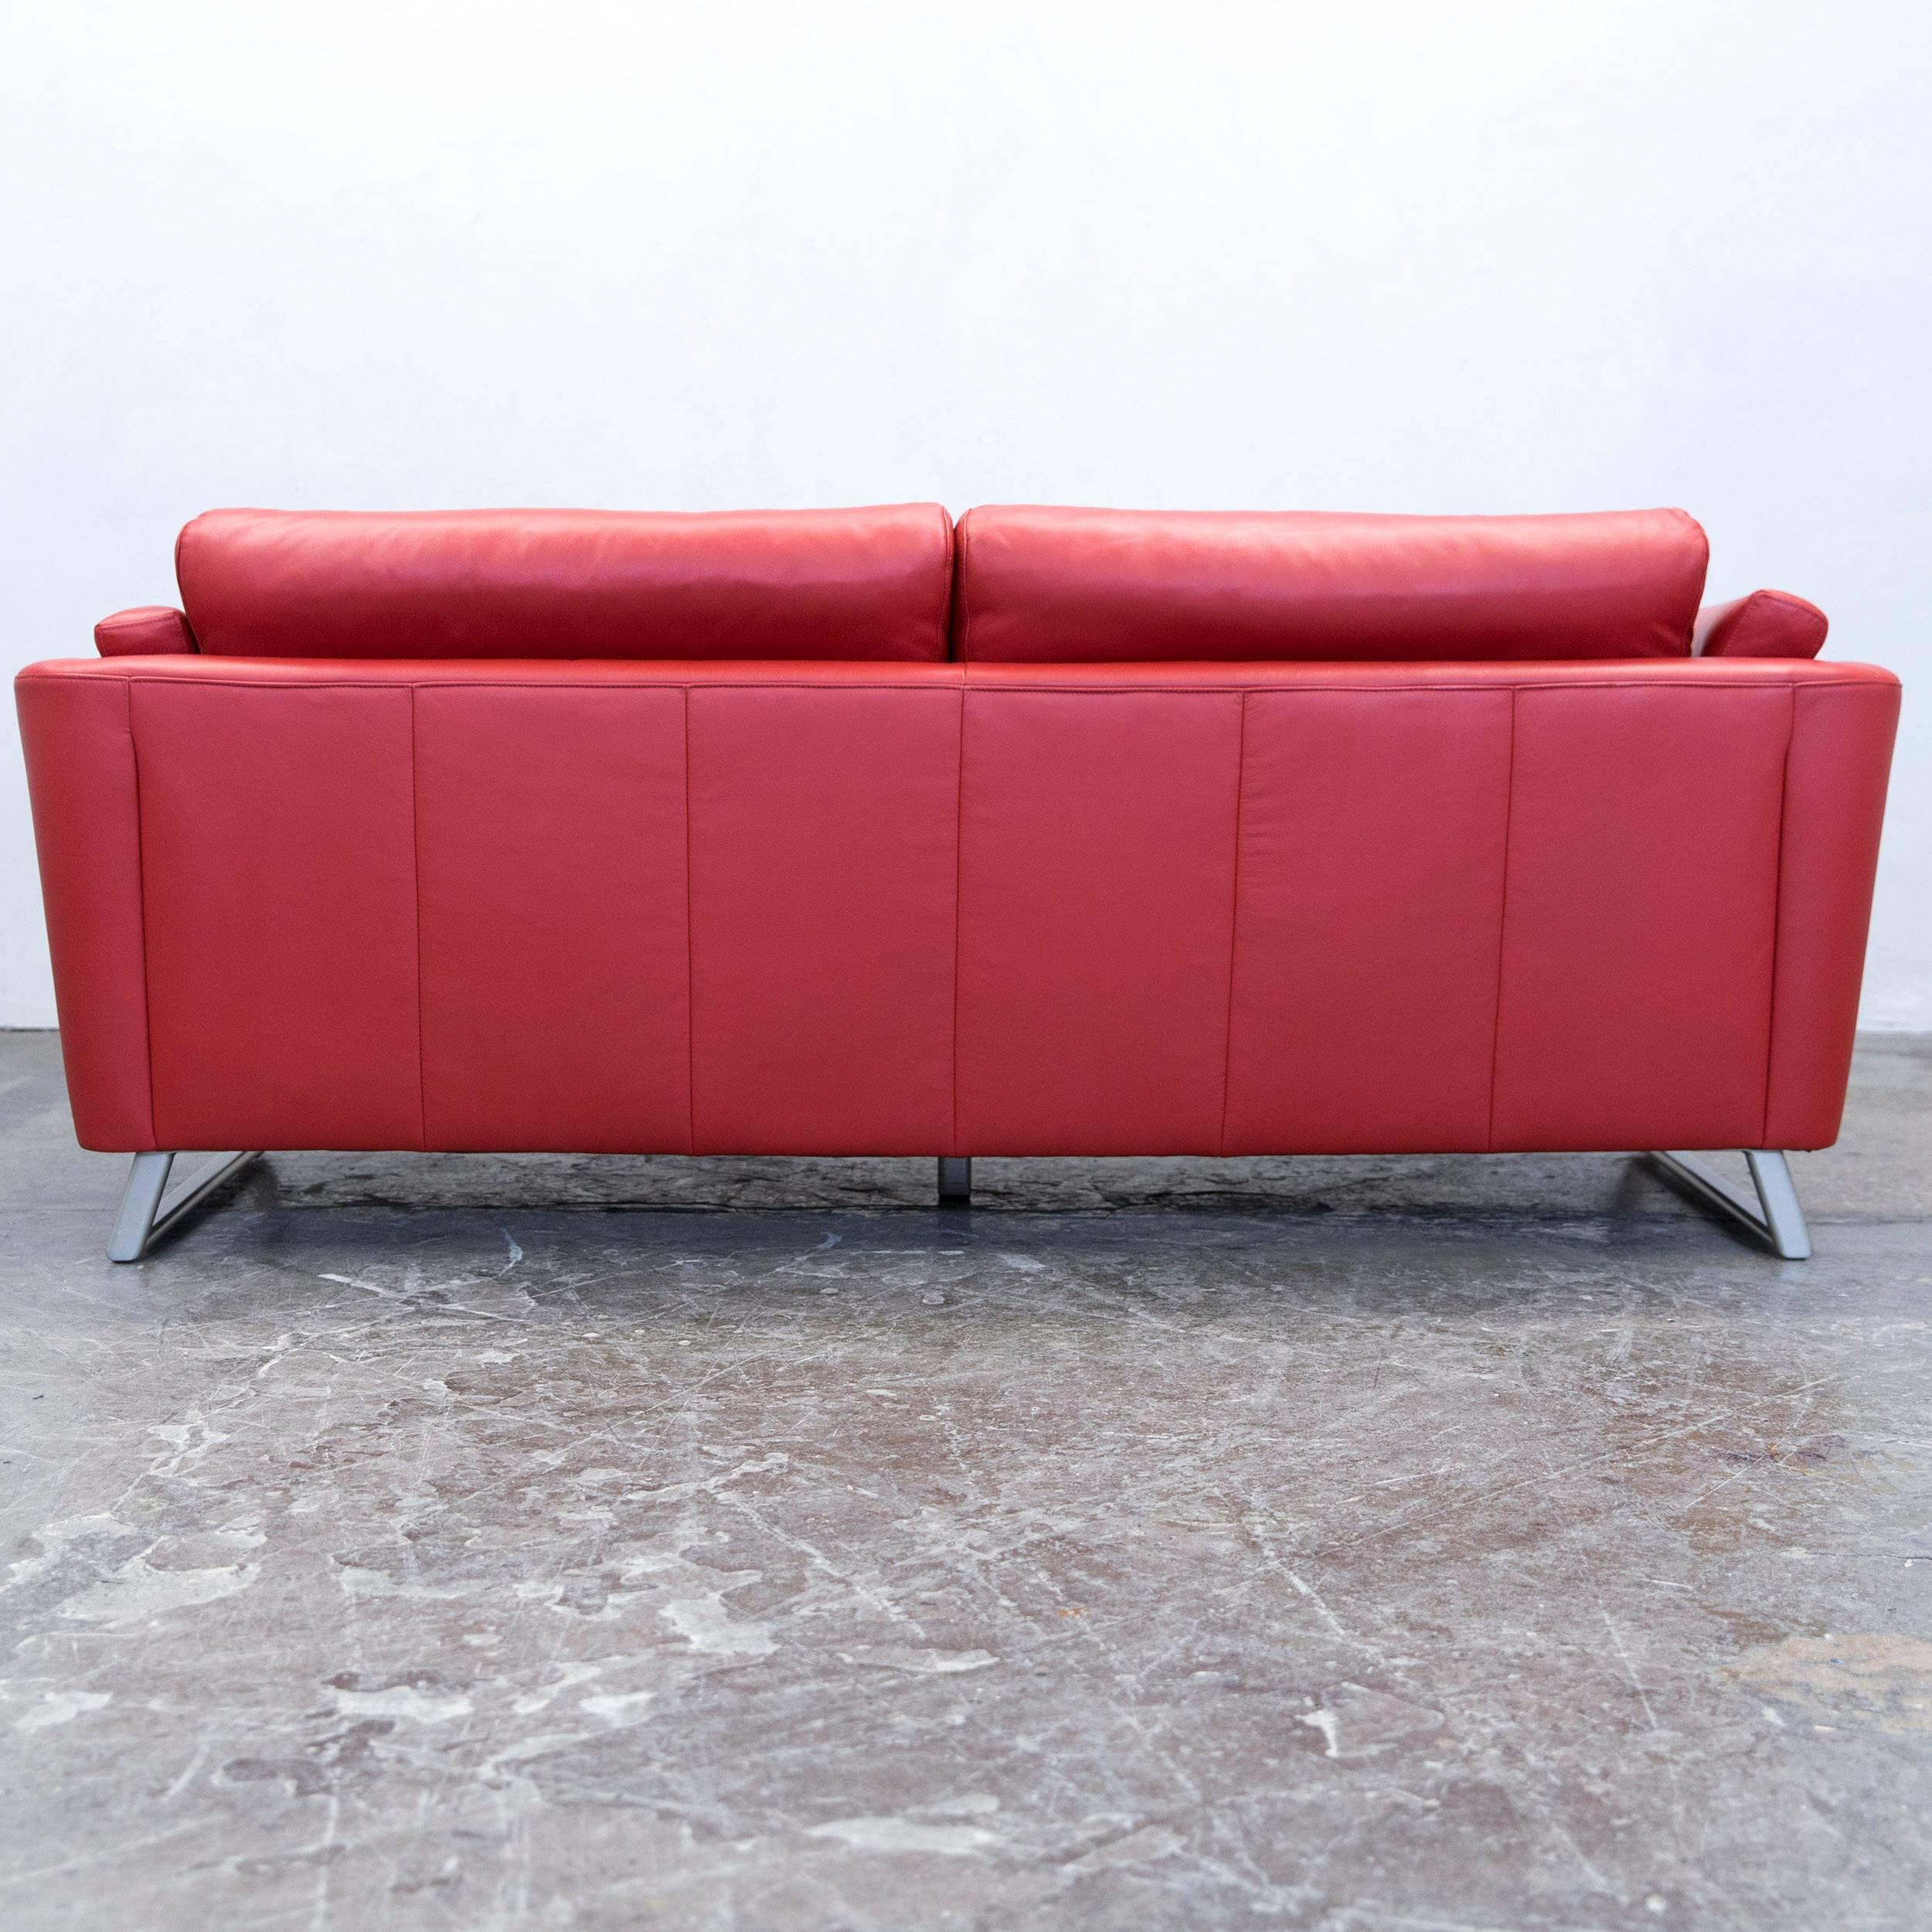 Designer Sofa Leather Red Three-Seat Couch Modern For Sale 3